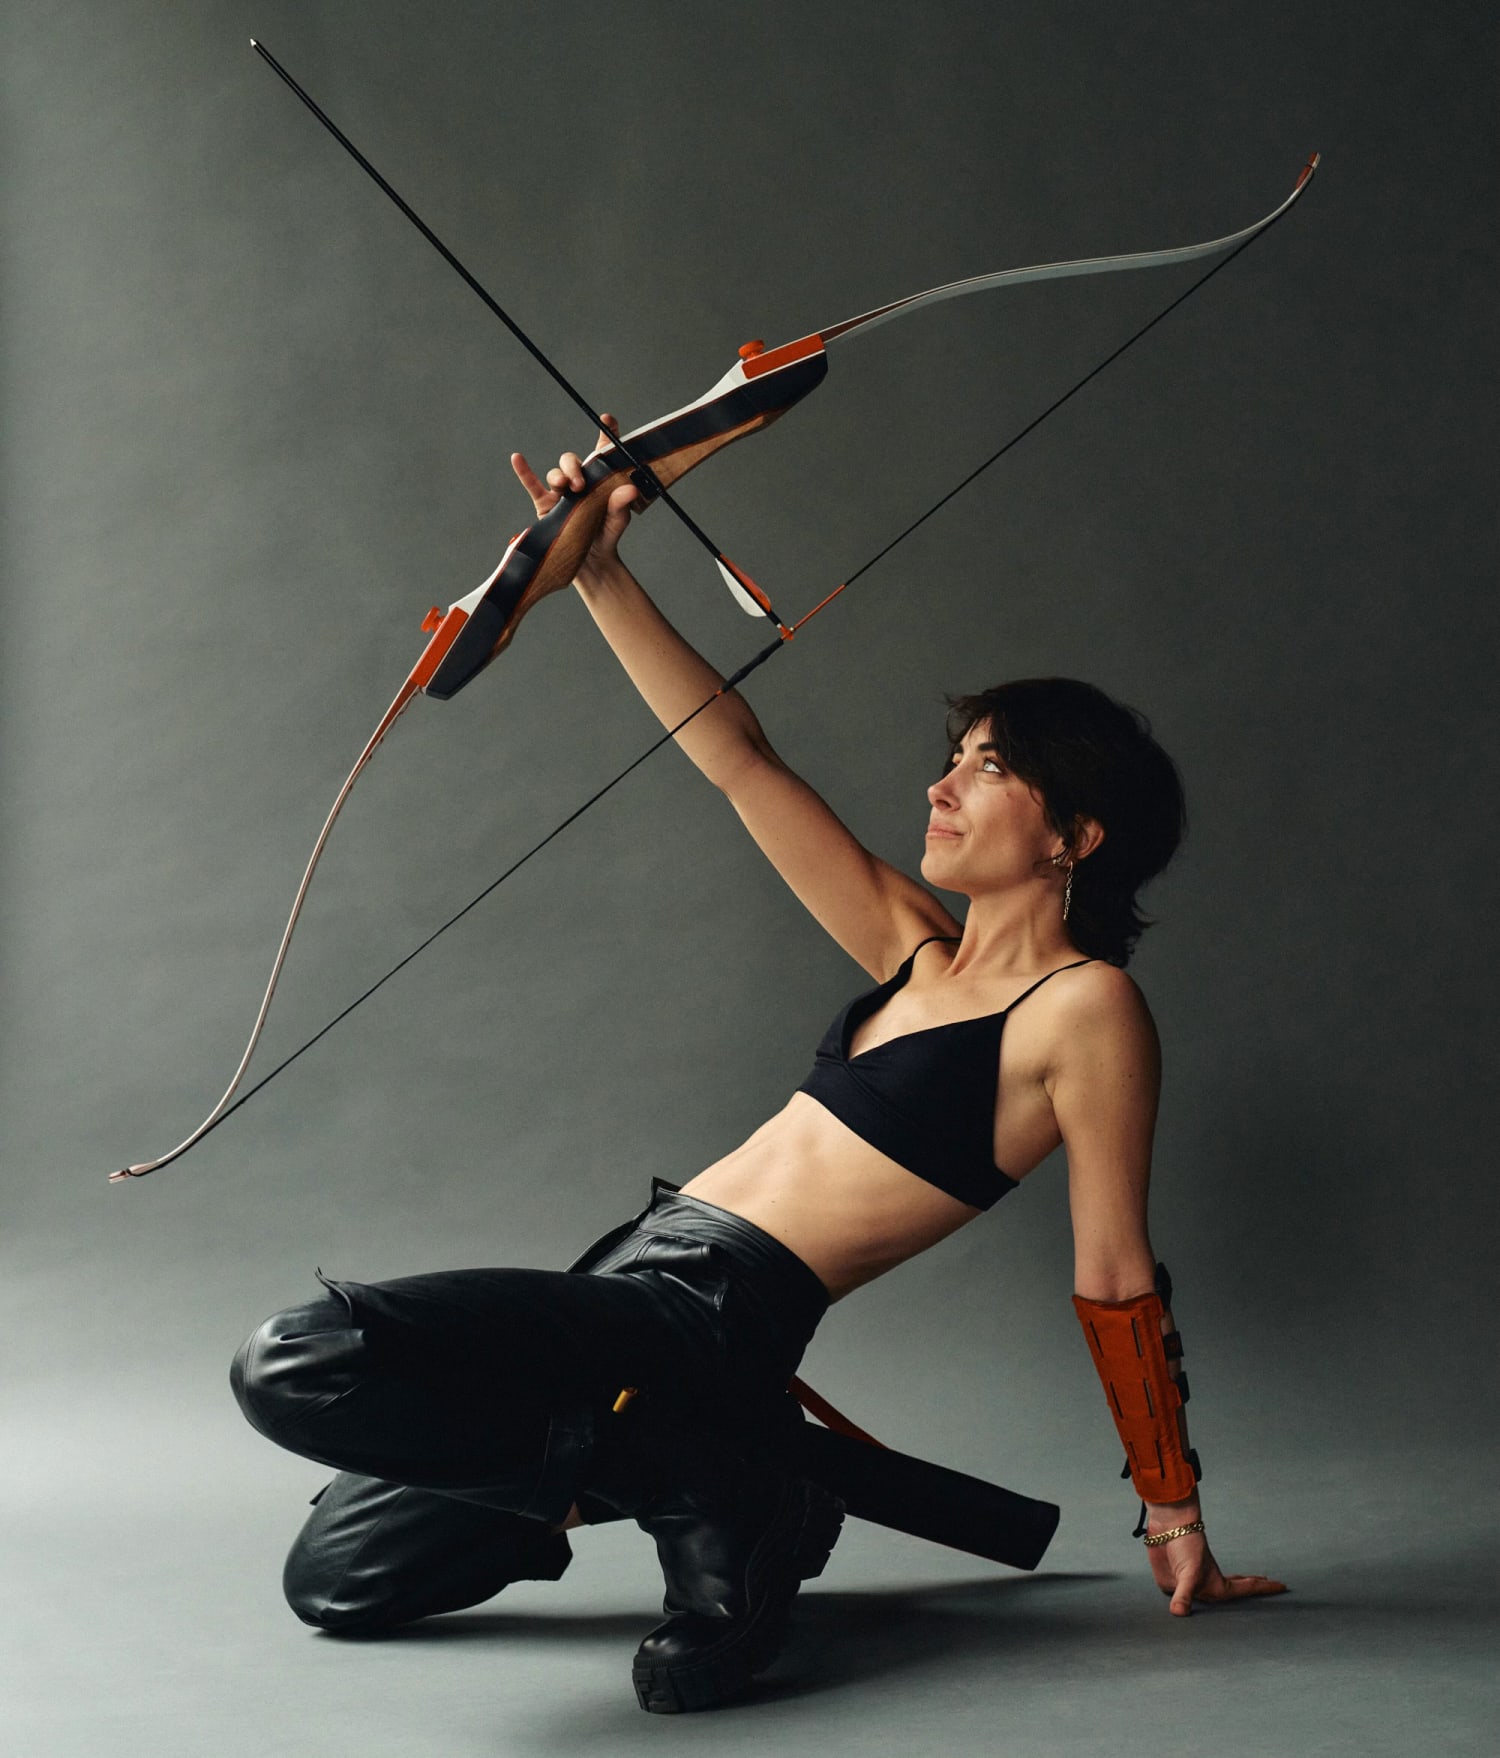 3D Render : a Shirtless Young Male Archer Pose Practicing Archery in the  Studio Stock Illustration - Illustration of targeting, pose: 186161174